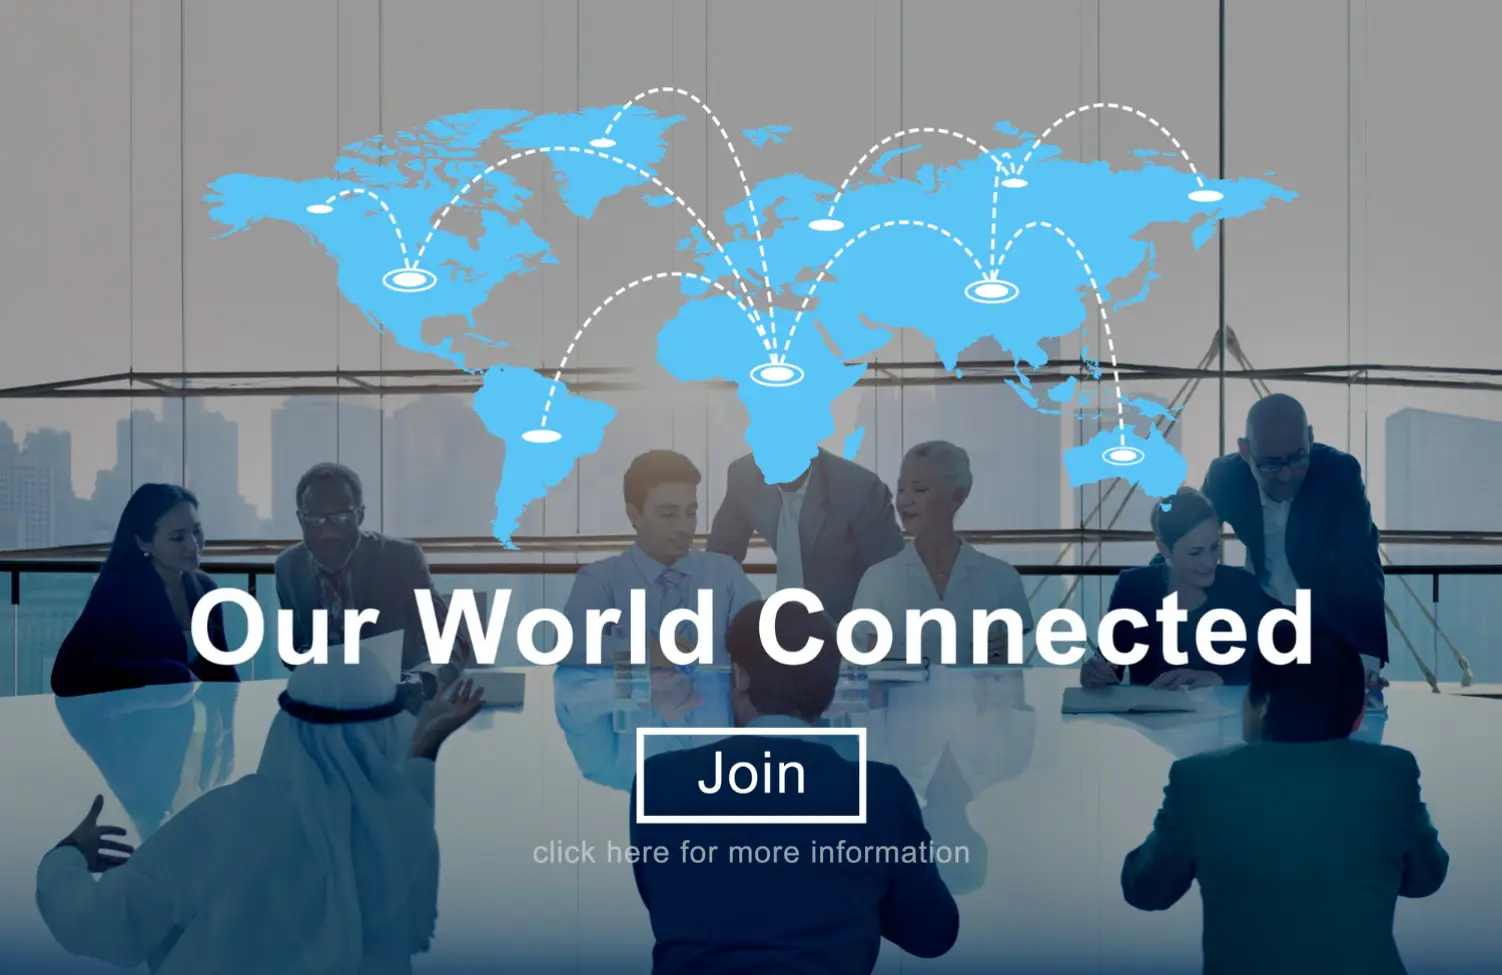 Stay Connected Globally